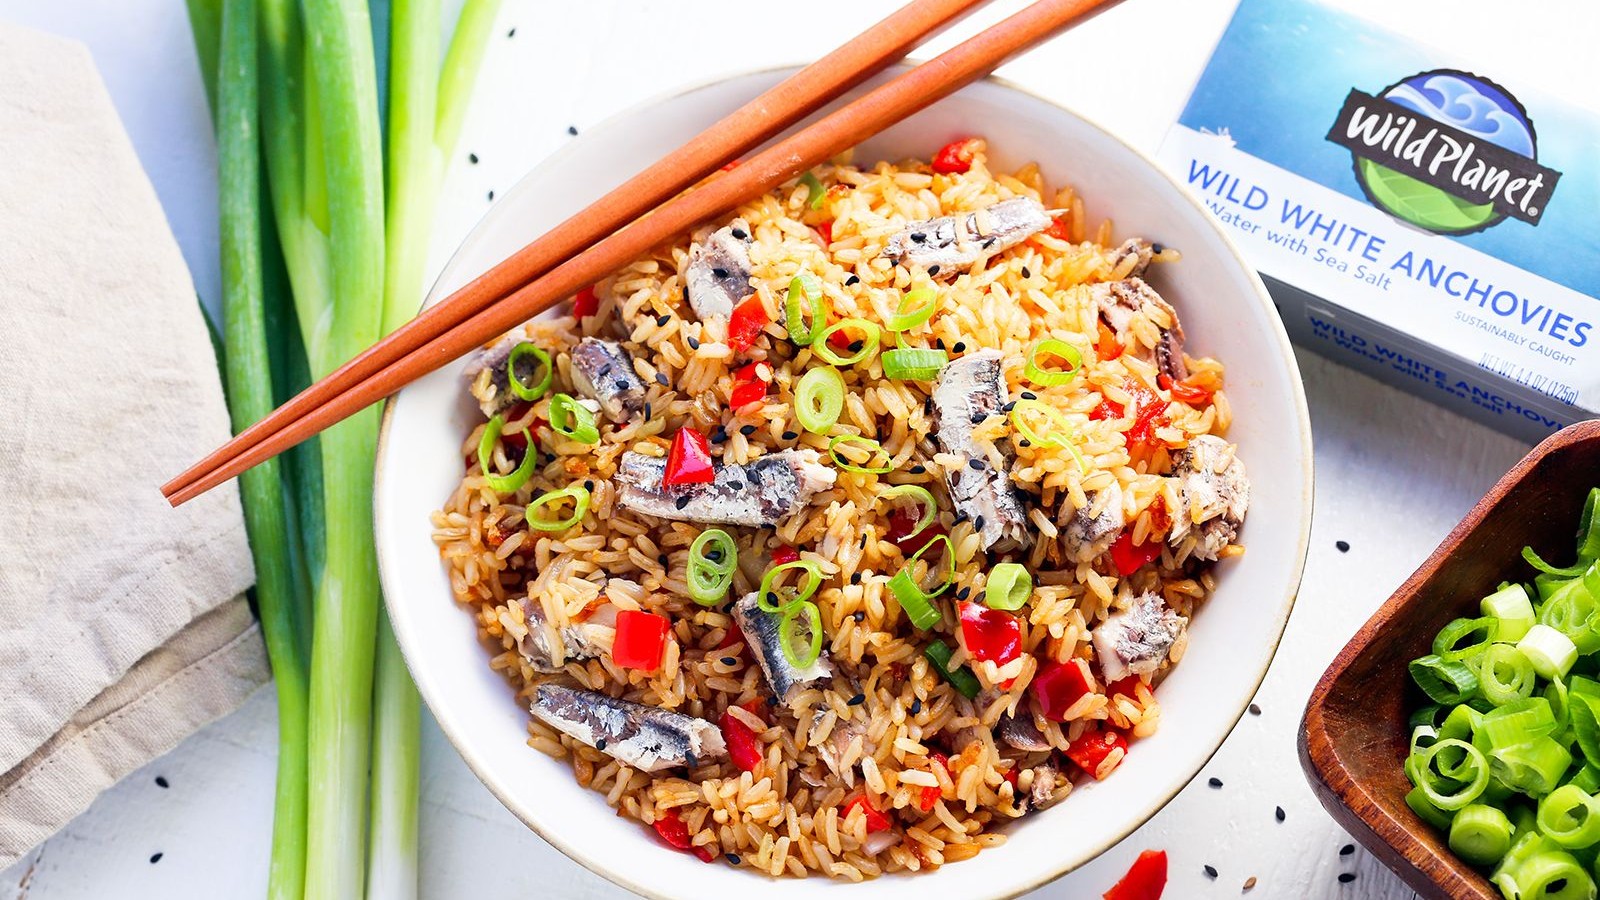 Image of Anchovy Fried Rice